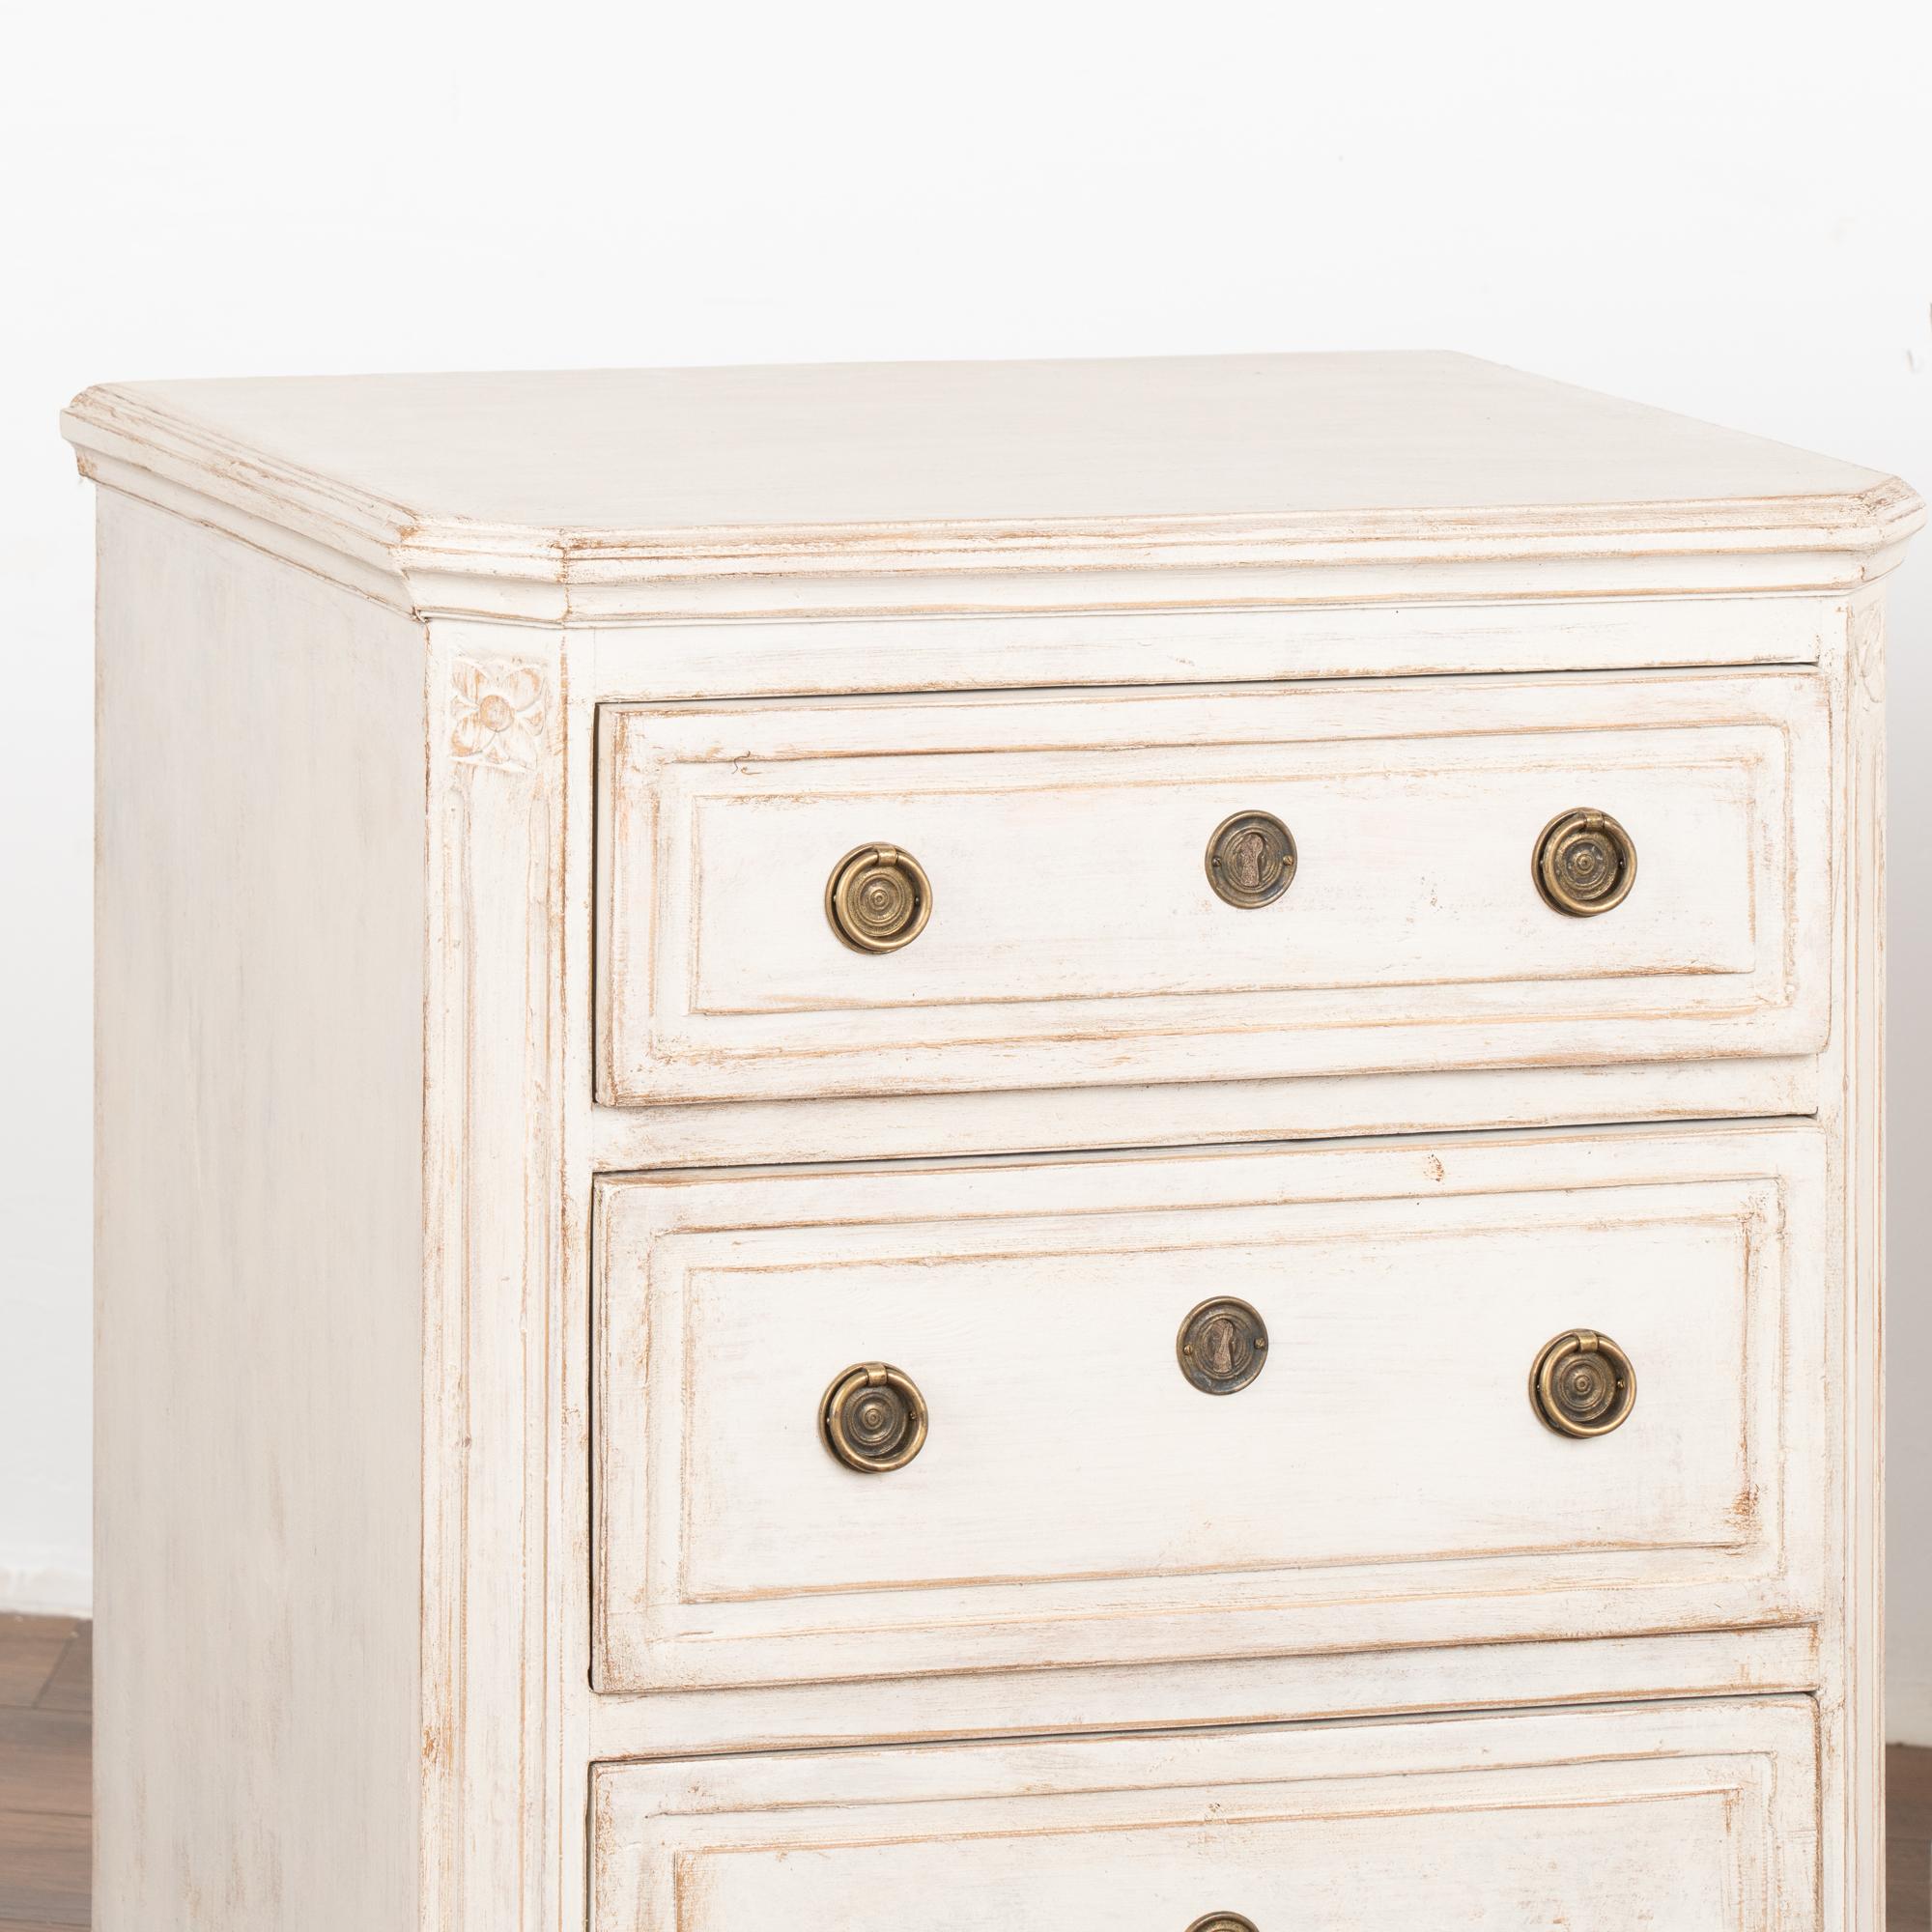 19th Century Pair of Small White Chest of Drawers, Nightstands, Sweden circa 1860-80